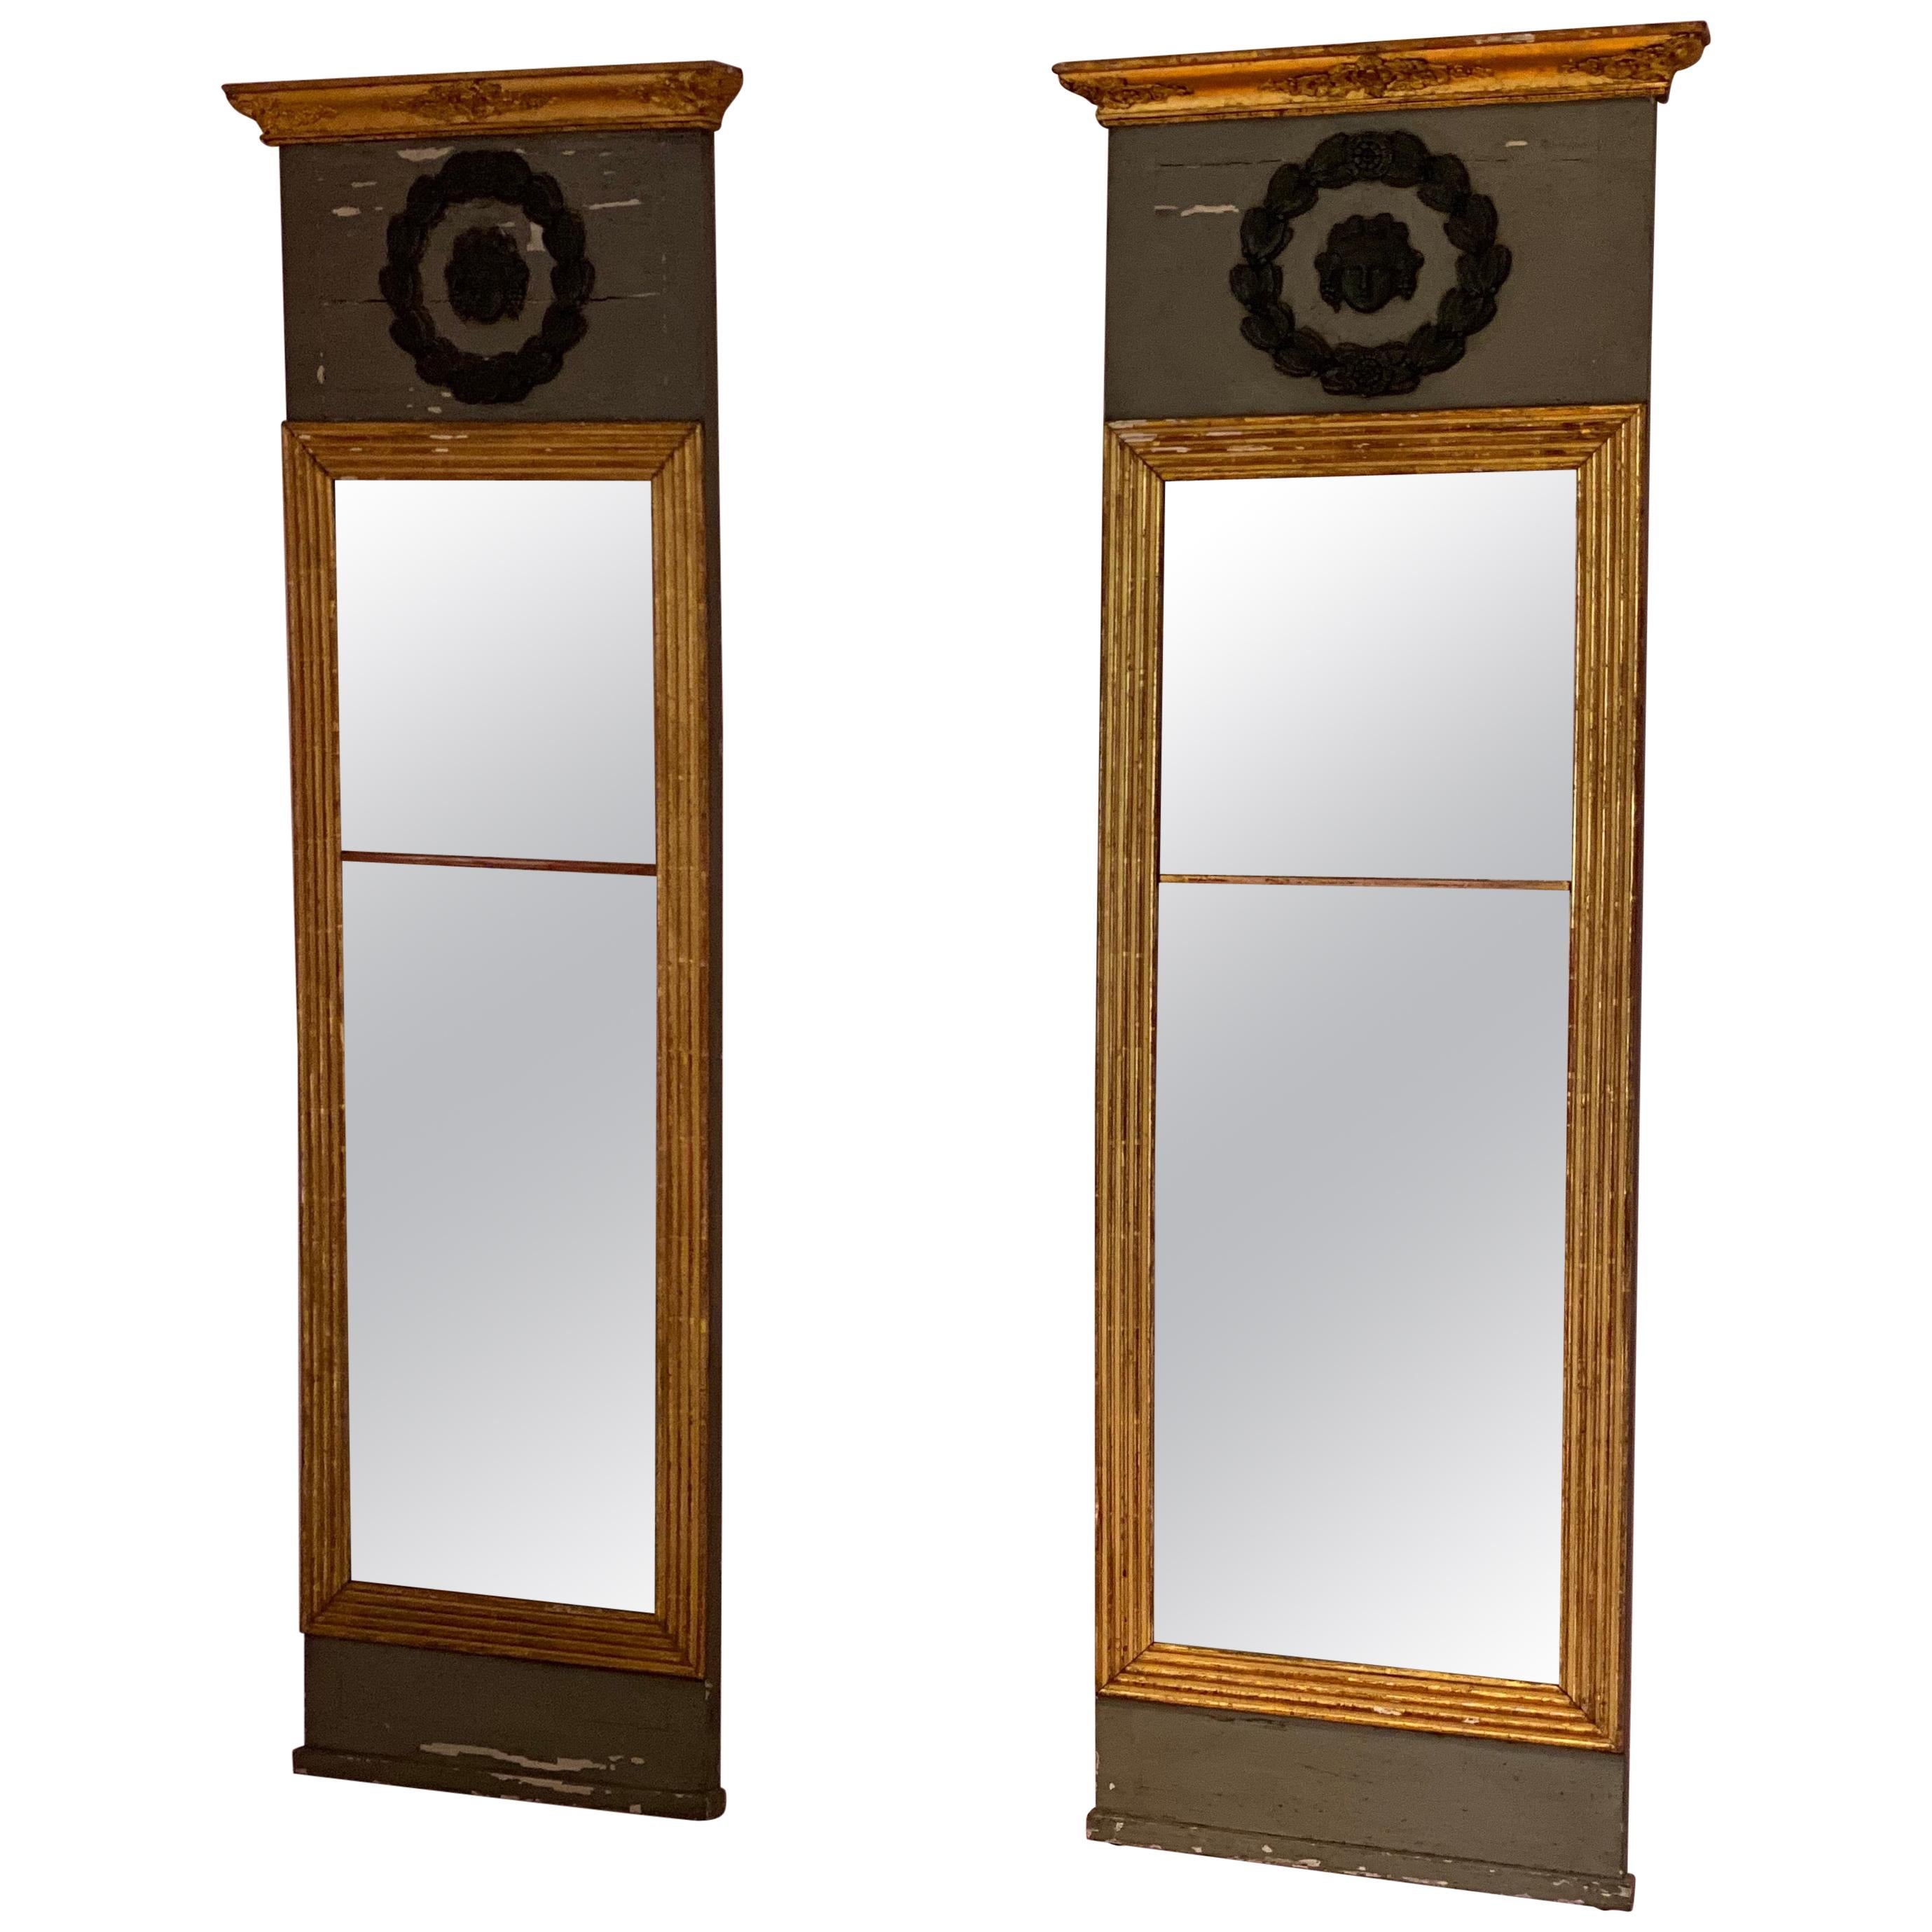 Pair of Early 19th Century Swedish Neoclassical Painted Pier Mirrors